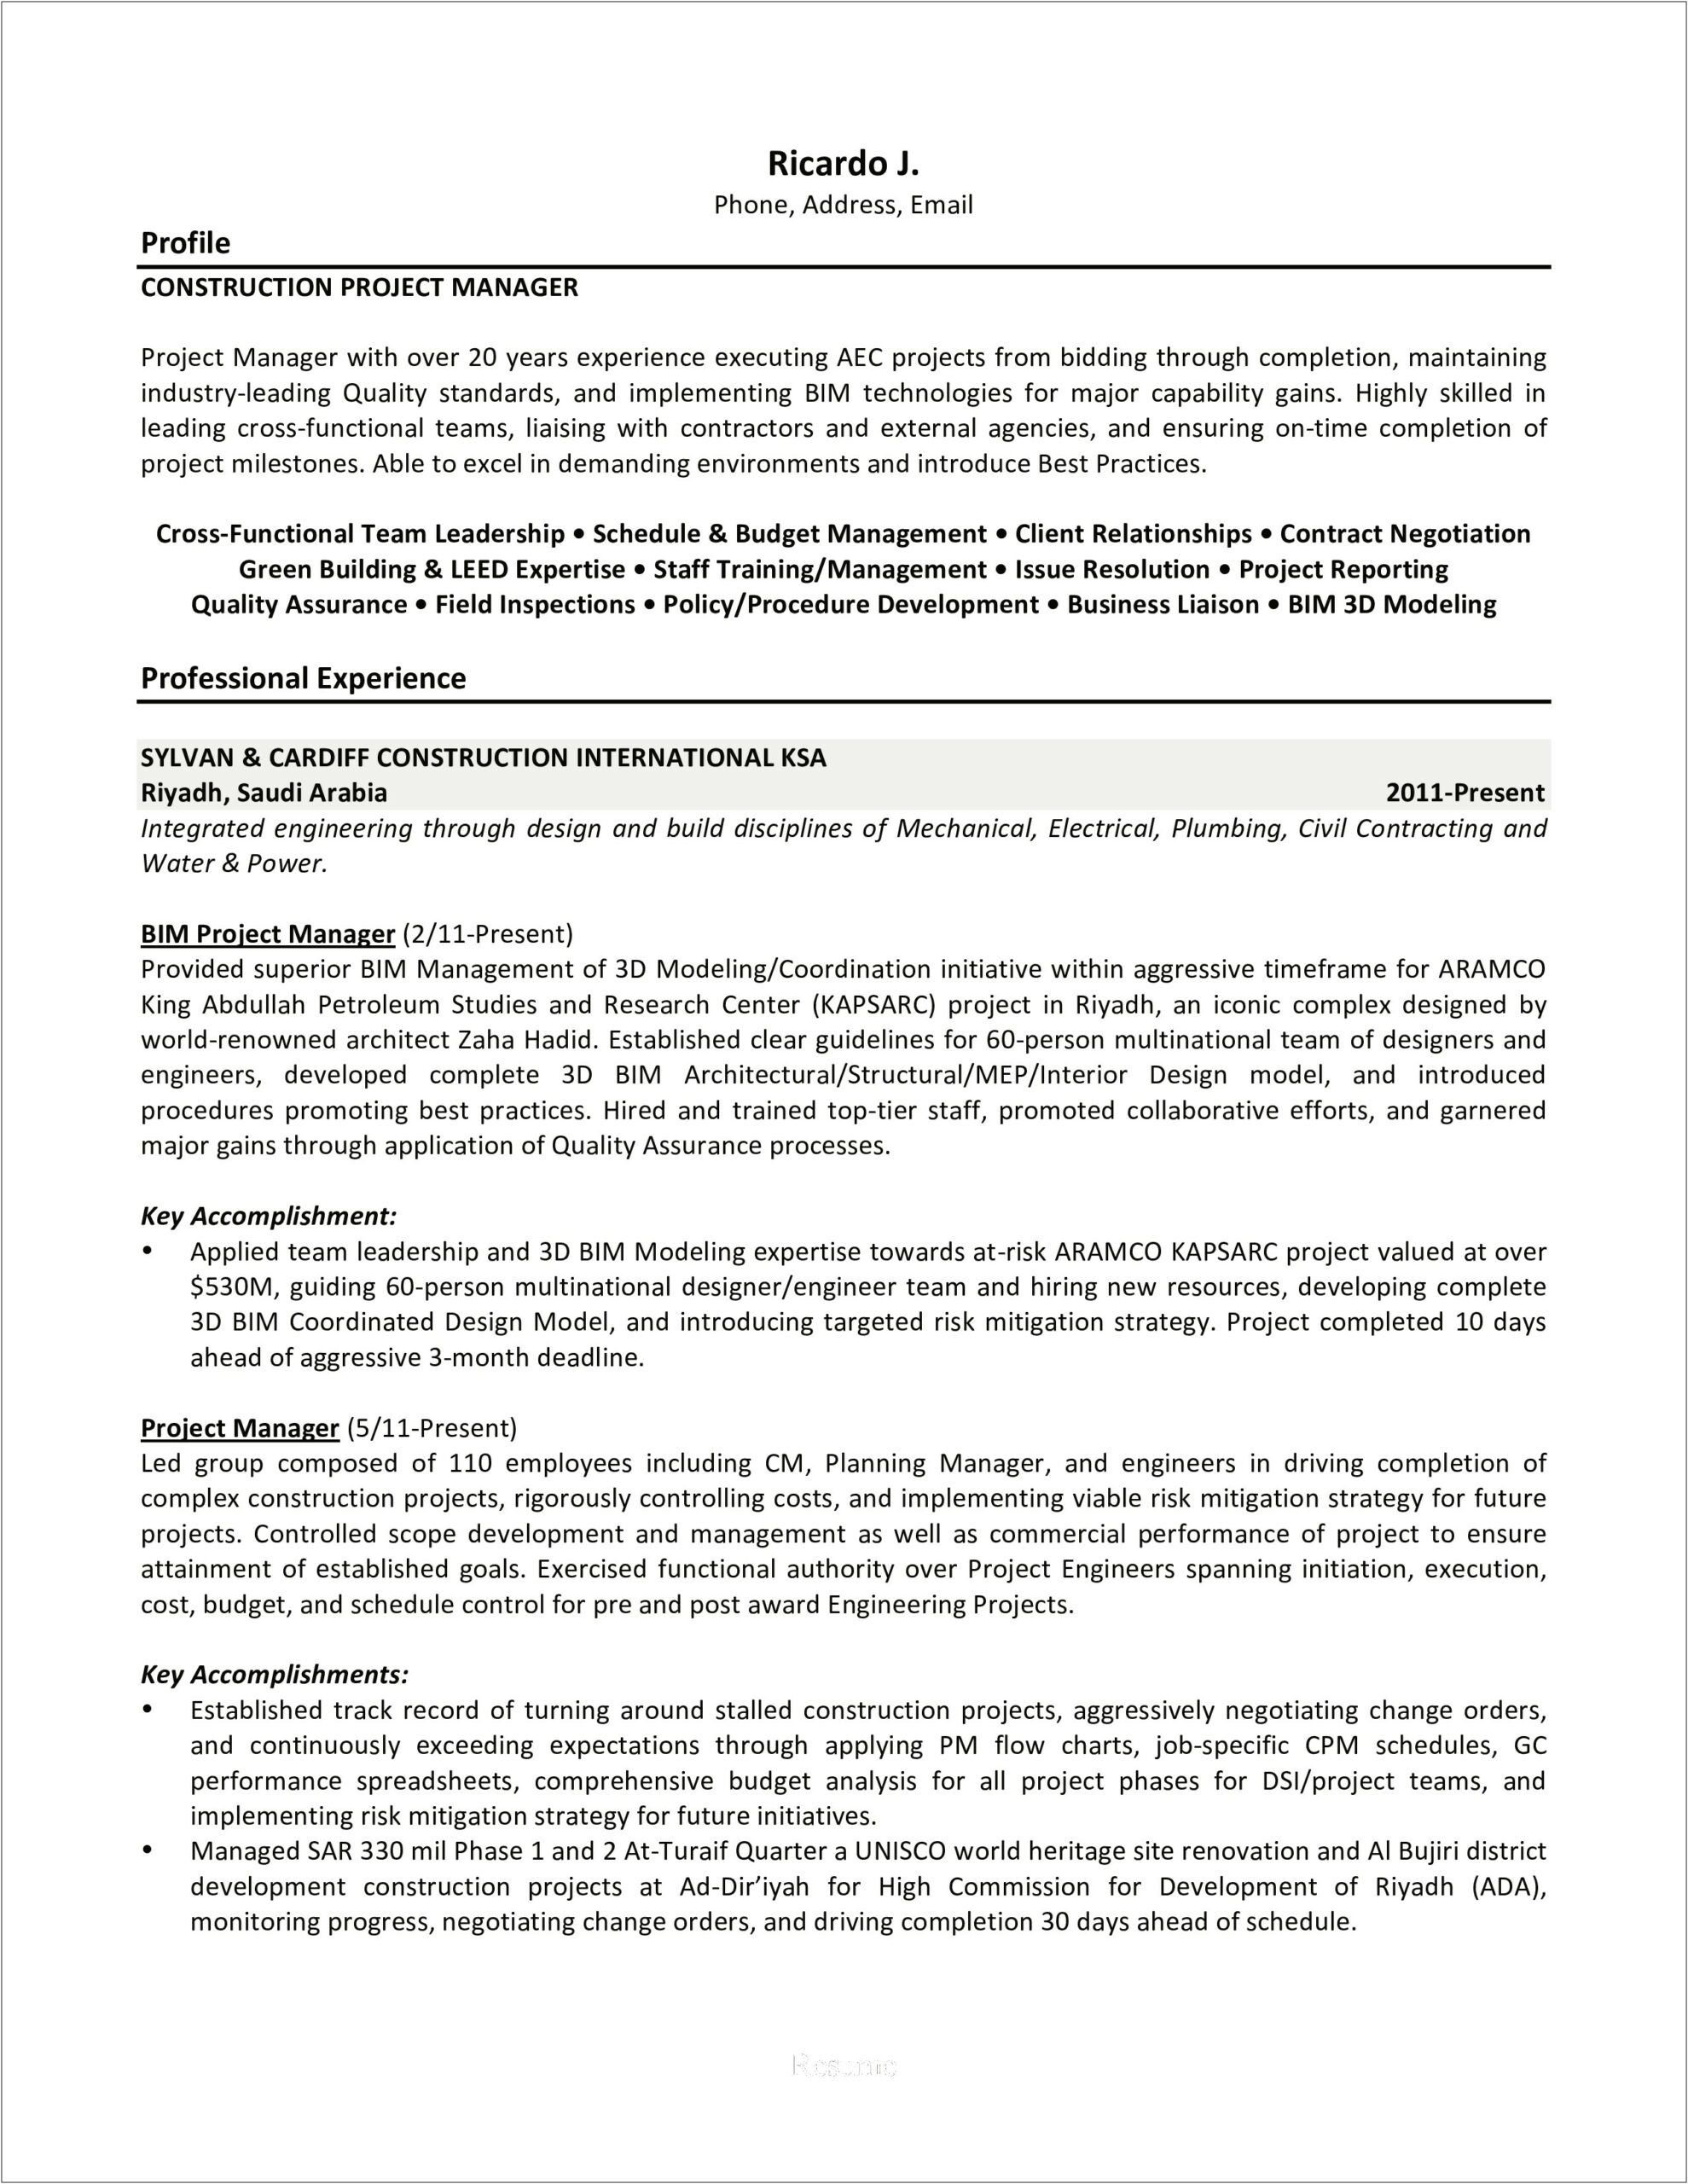 Resume For Project Manager Position Pharma